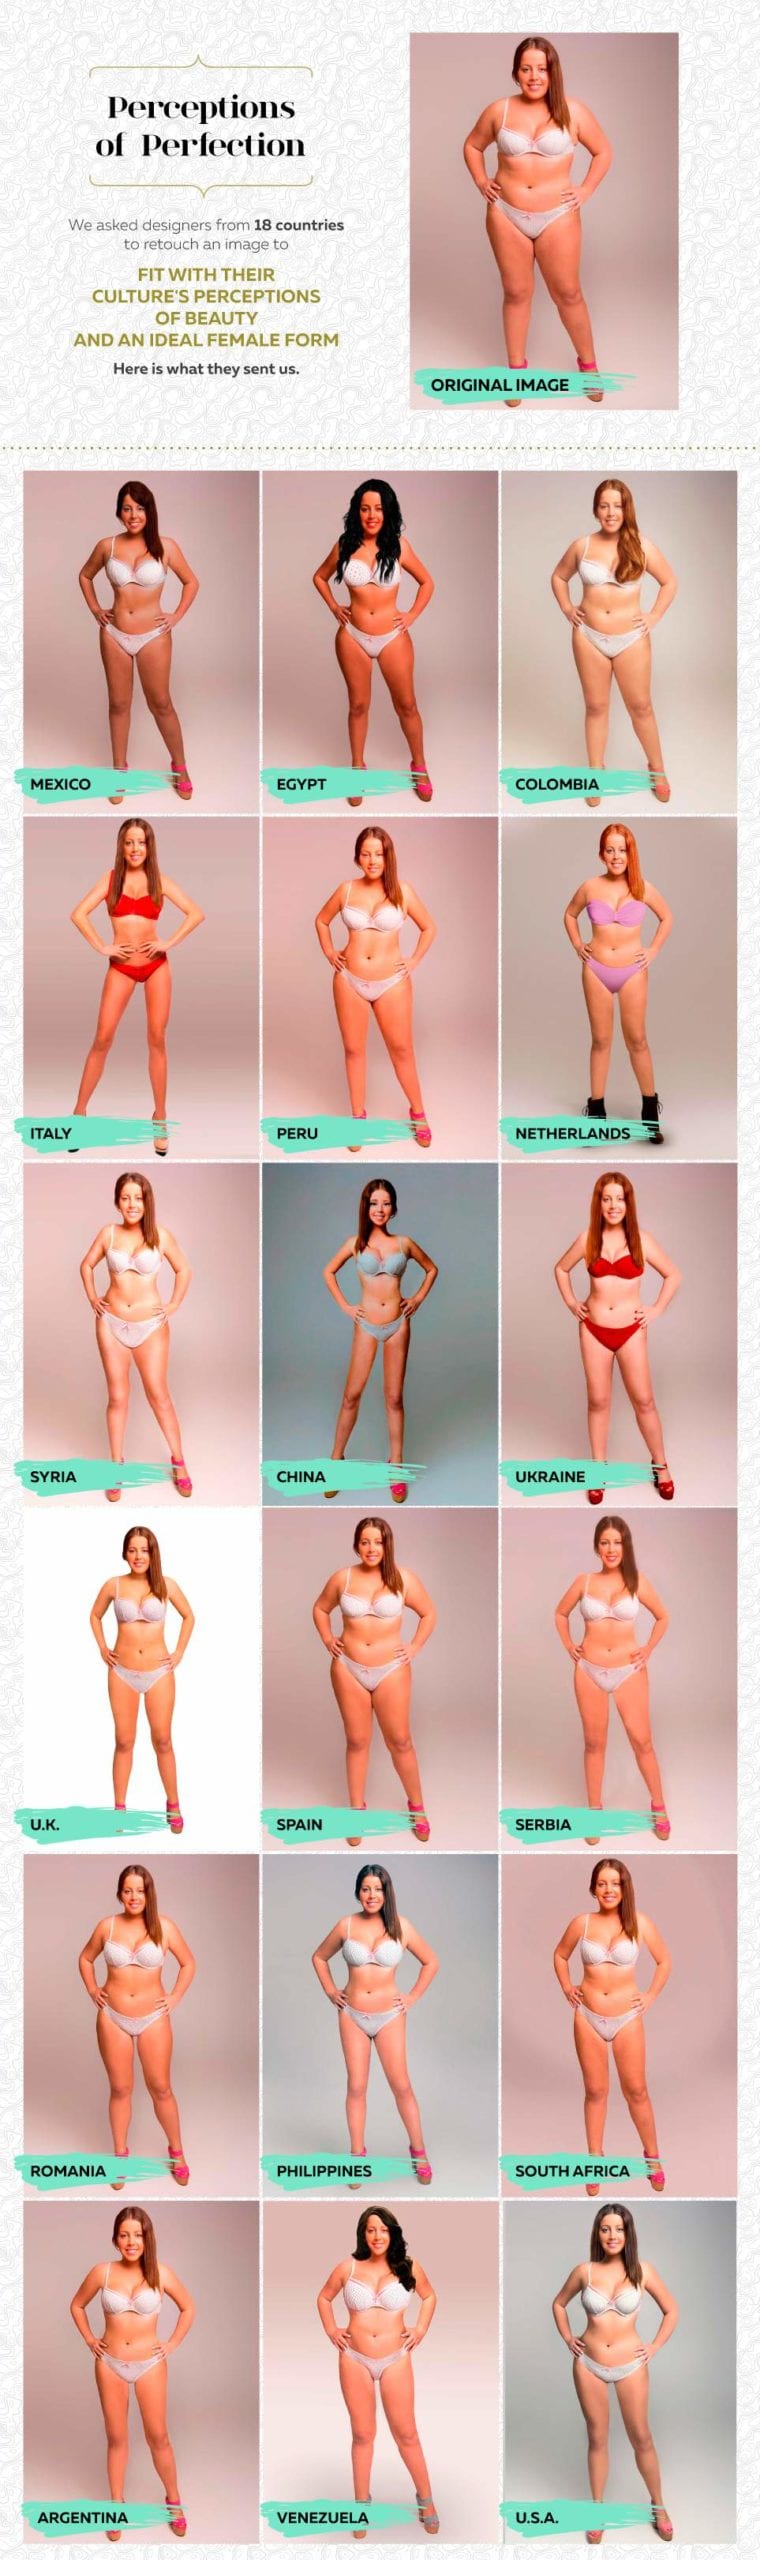 Infographic with the title 'Perceptions of Perfection' There are different female bodies. The text at the bottom says 'We asked designers from 18 countries to retouch an image to FIT WITH THEIR CULTURE2S PERCEPTIONS OF BEAUTY AND AN IDEAL FEMALE FORM. Here is what they sent us.